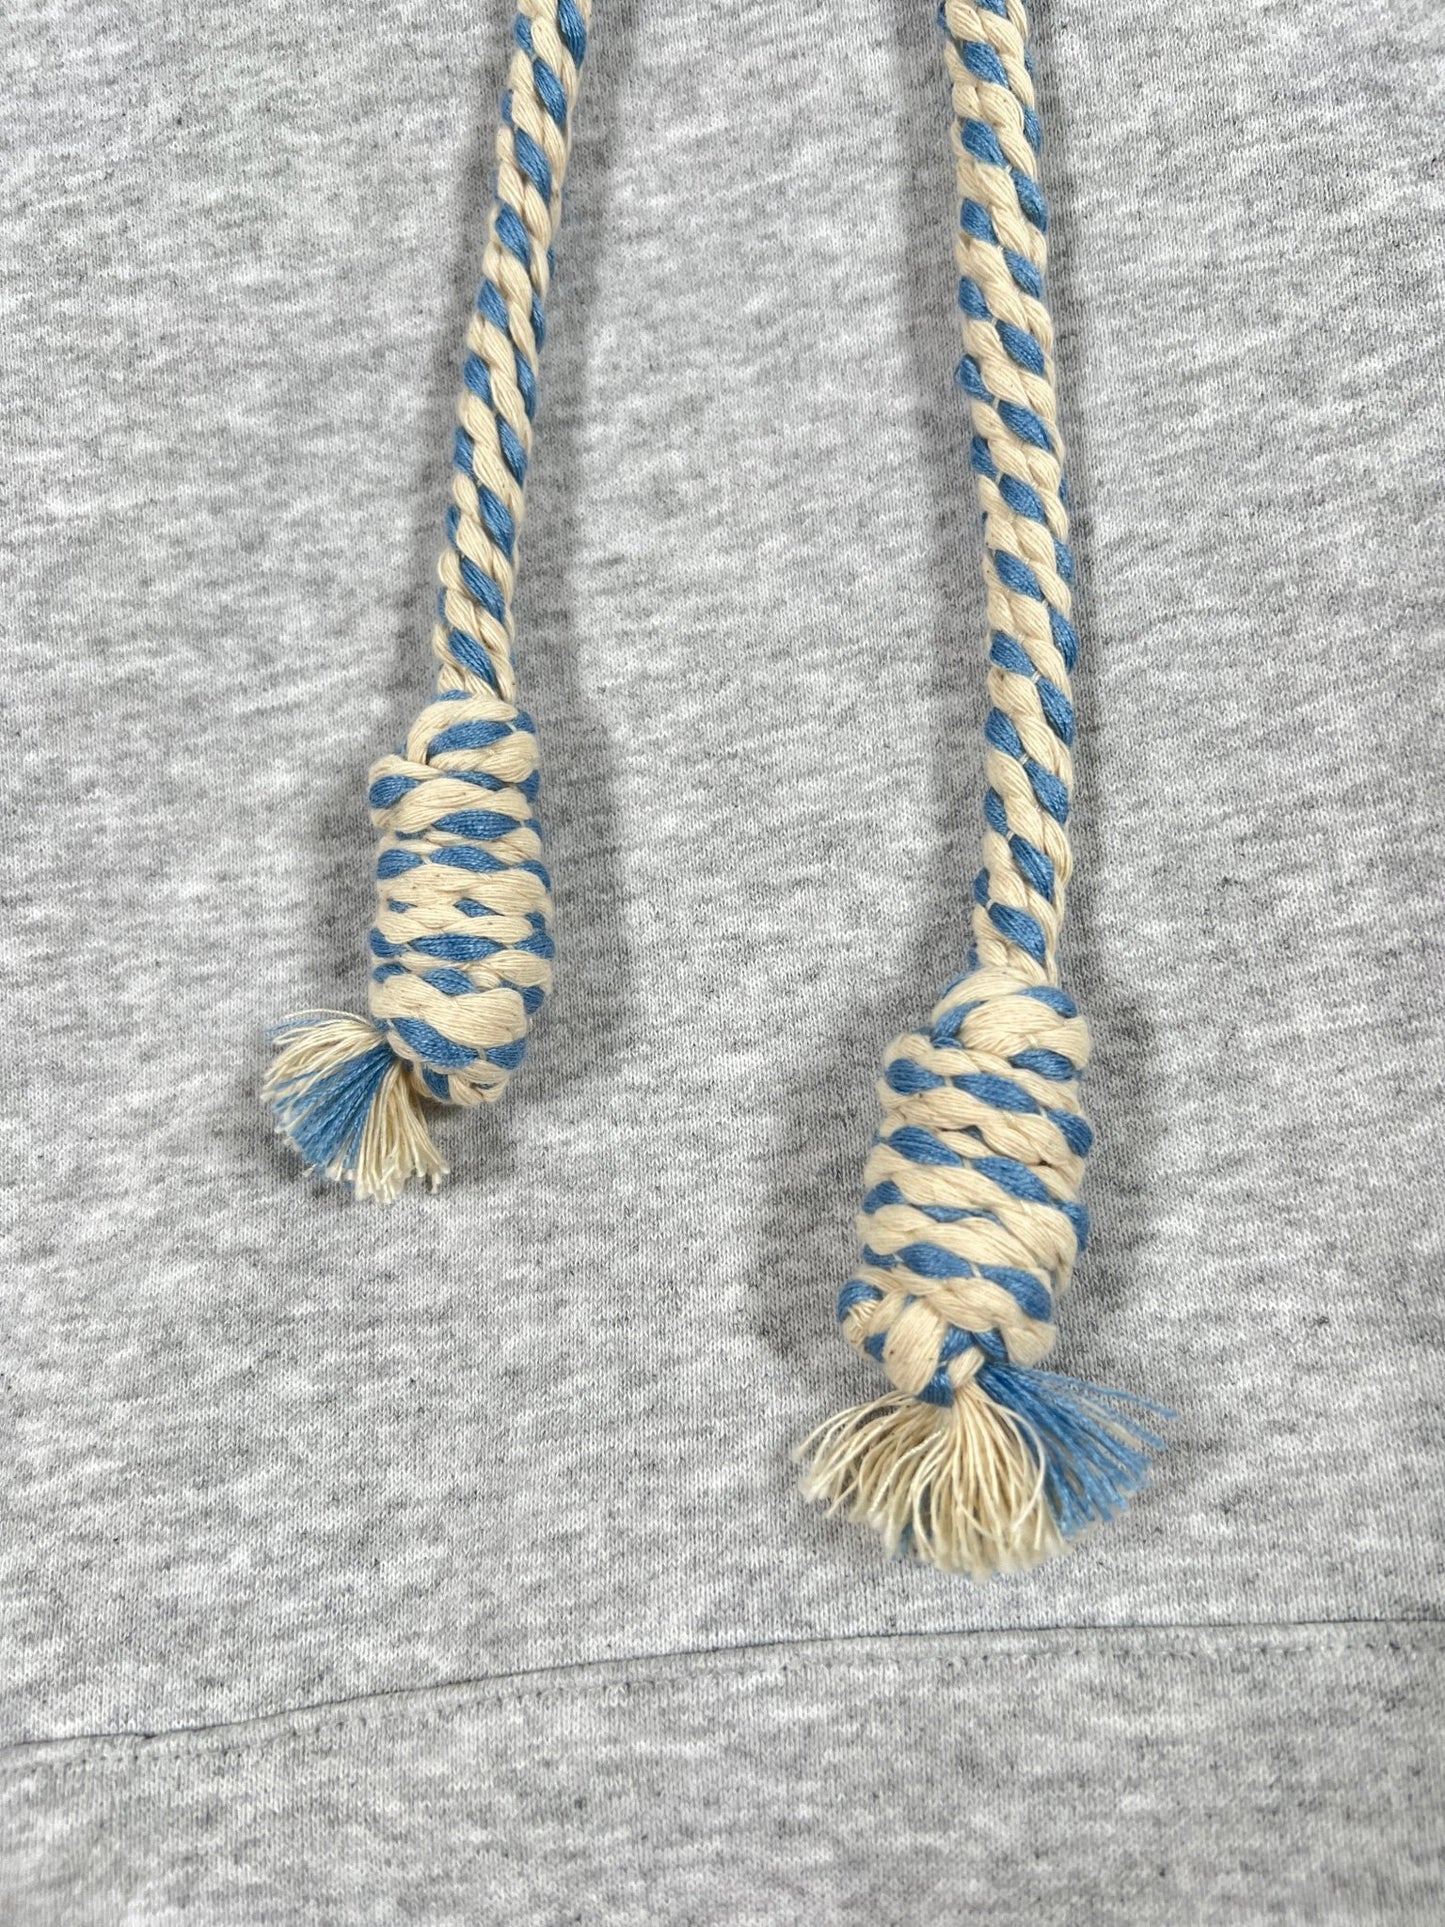 Close-up of blue and white braided drawstrings with thick rope texture lace detail on a grey AL AIN AHOX S150 YACHT LIMITED fabric background, likely part of a sweatshirt.